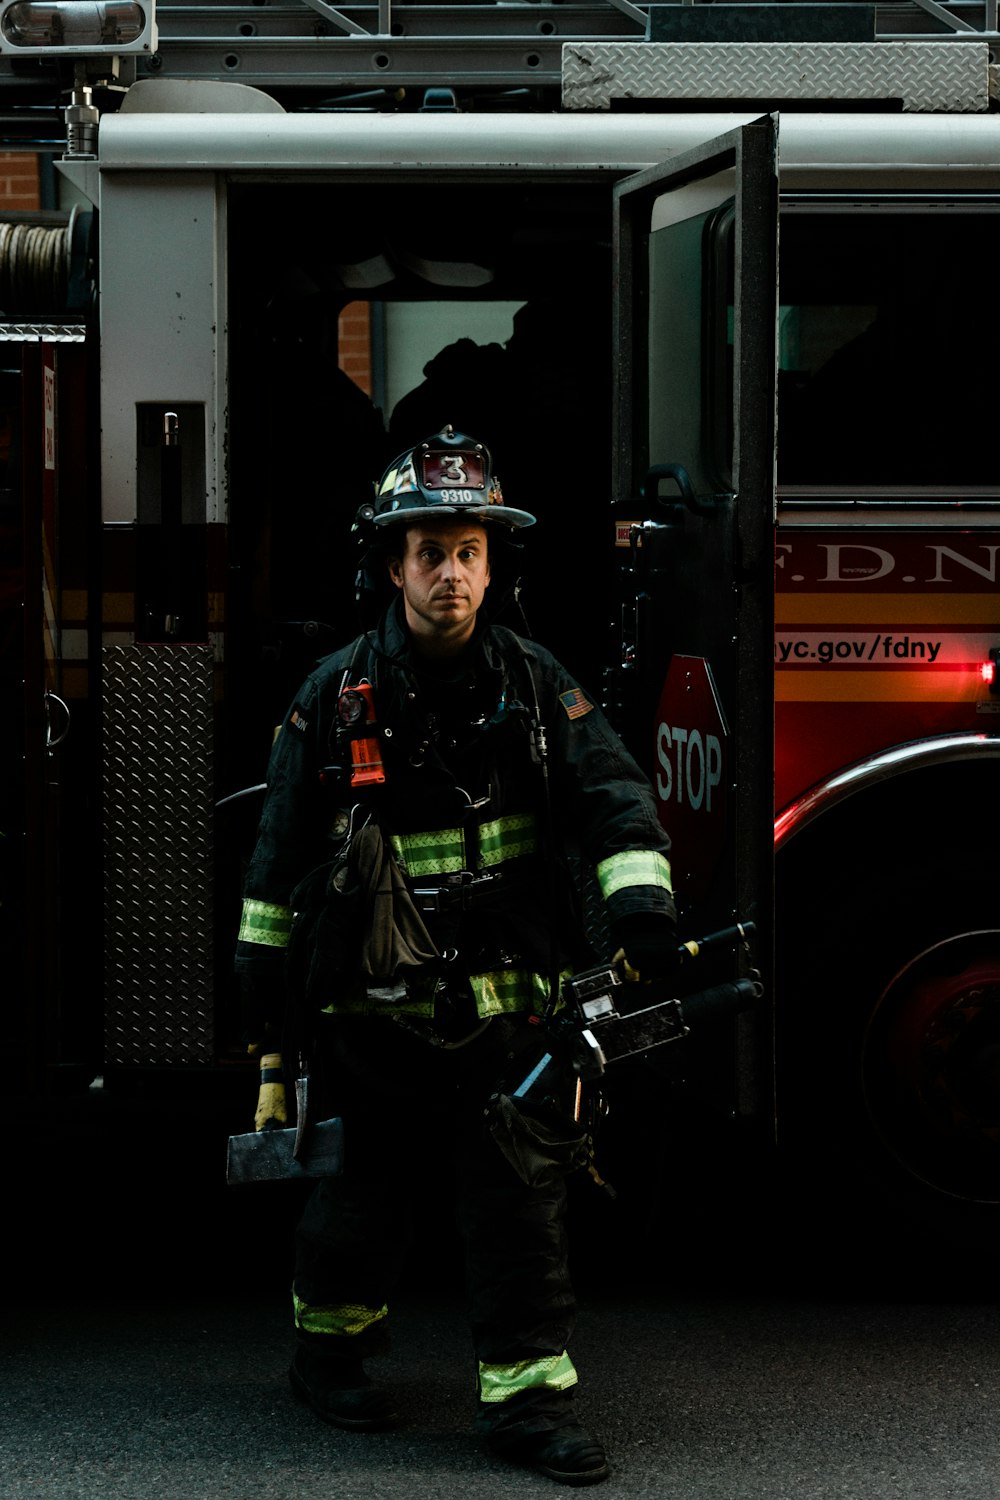 a firefighter standing in front of a fire truck